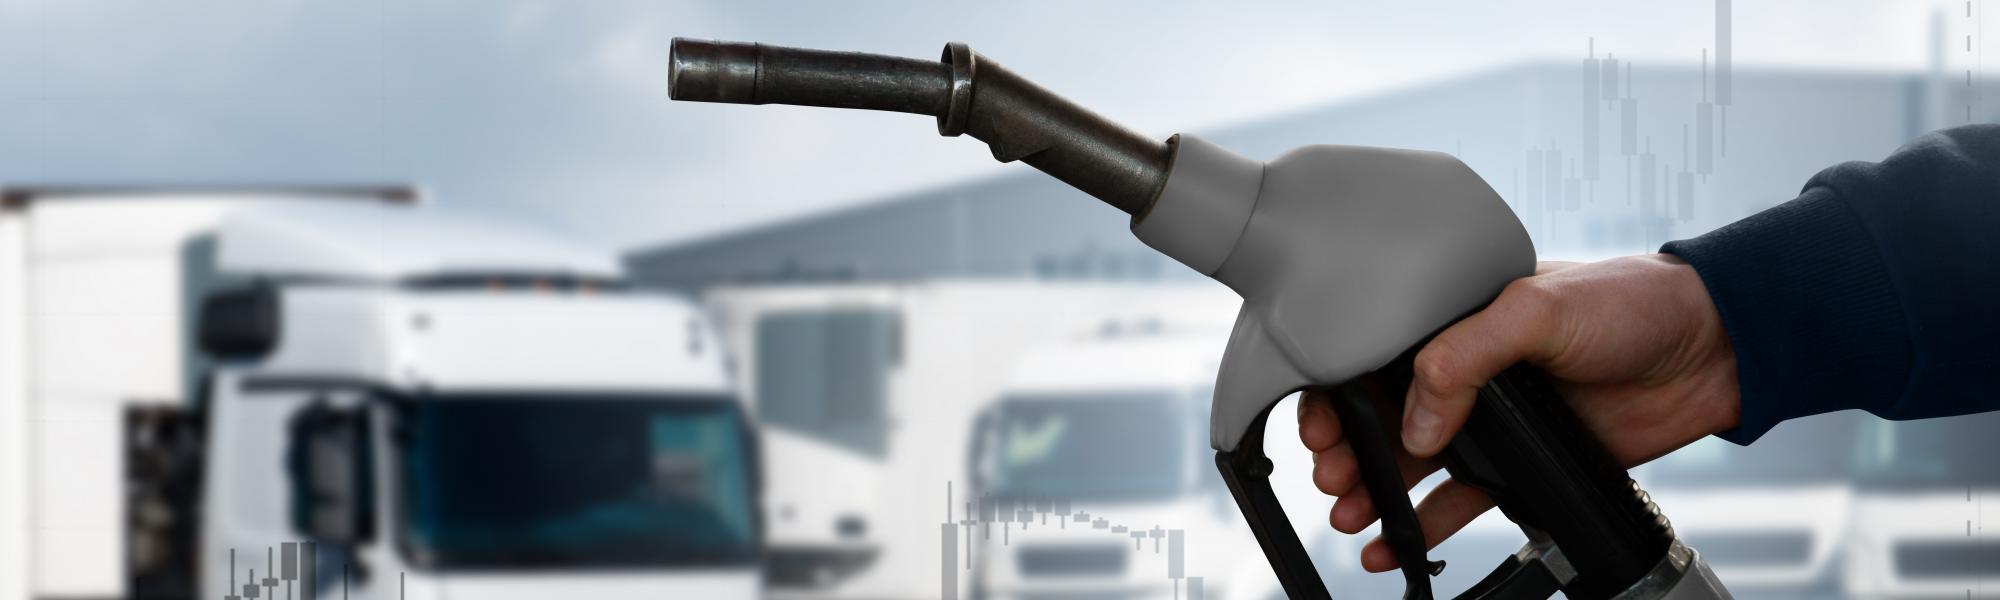 Action on fuel vital to stop transport collapse and secure decarbonisation